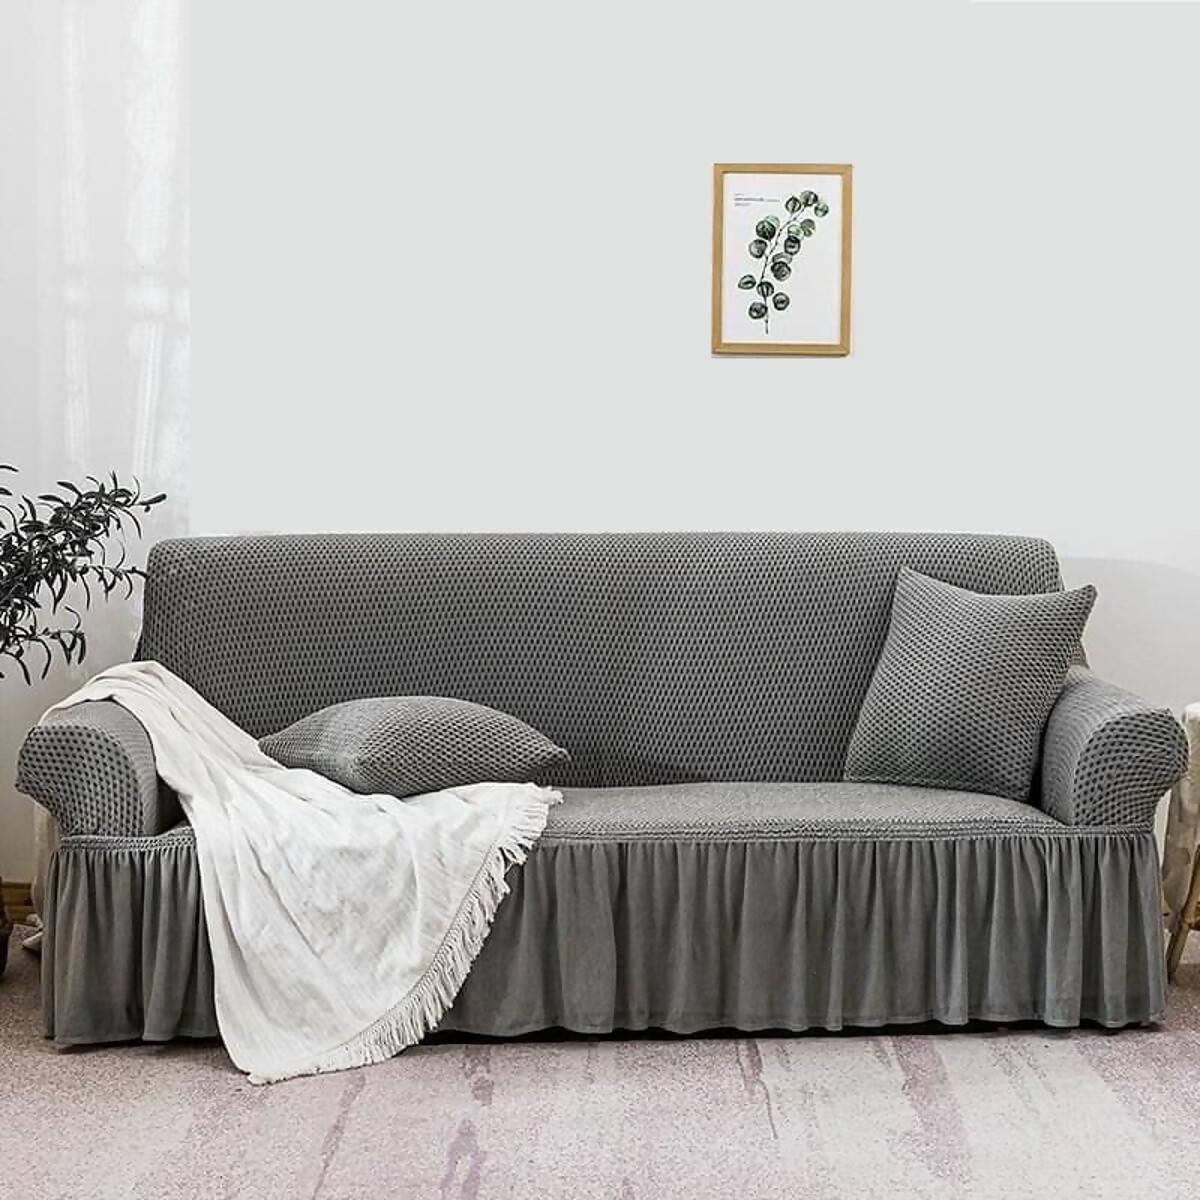 Sofa Cover Turkey Style - Home Textile (Standard Size) - ValueBox